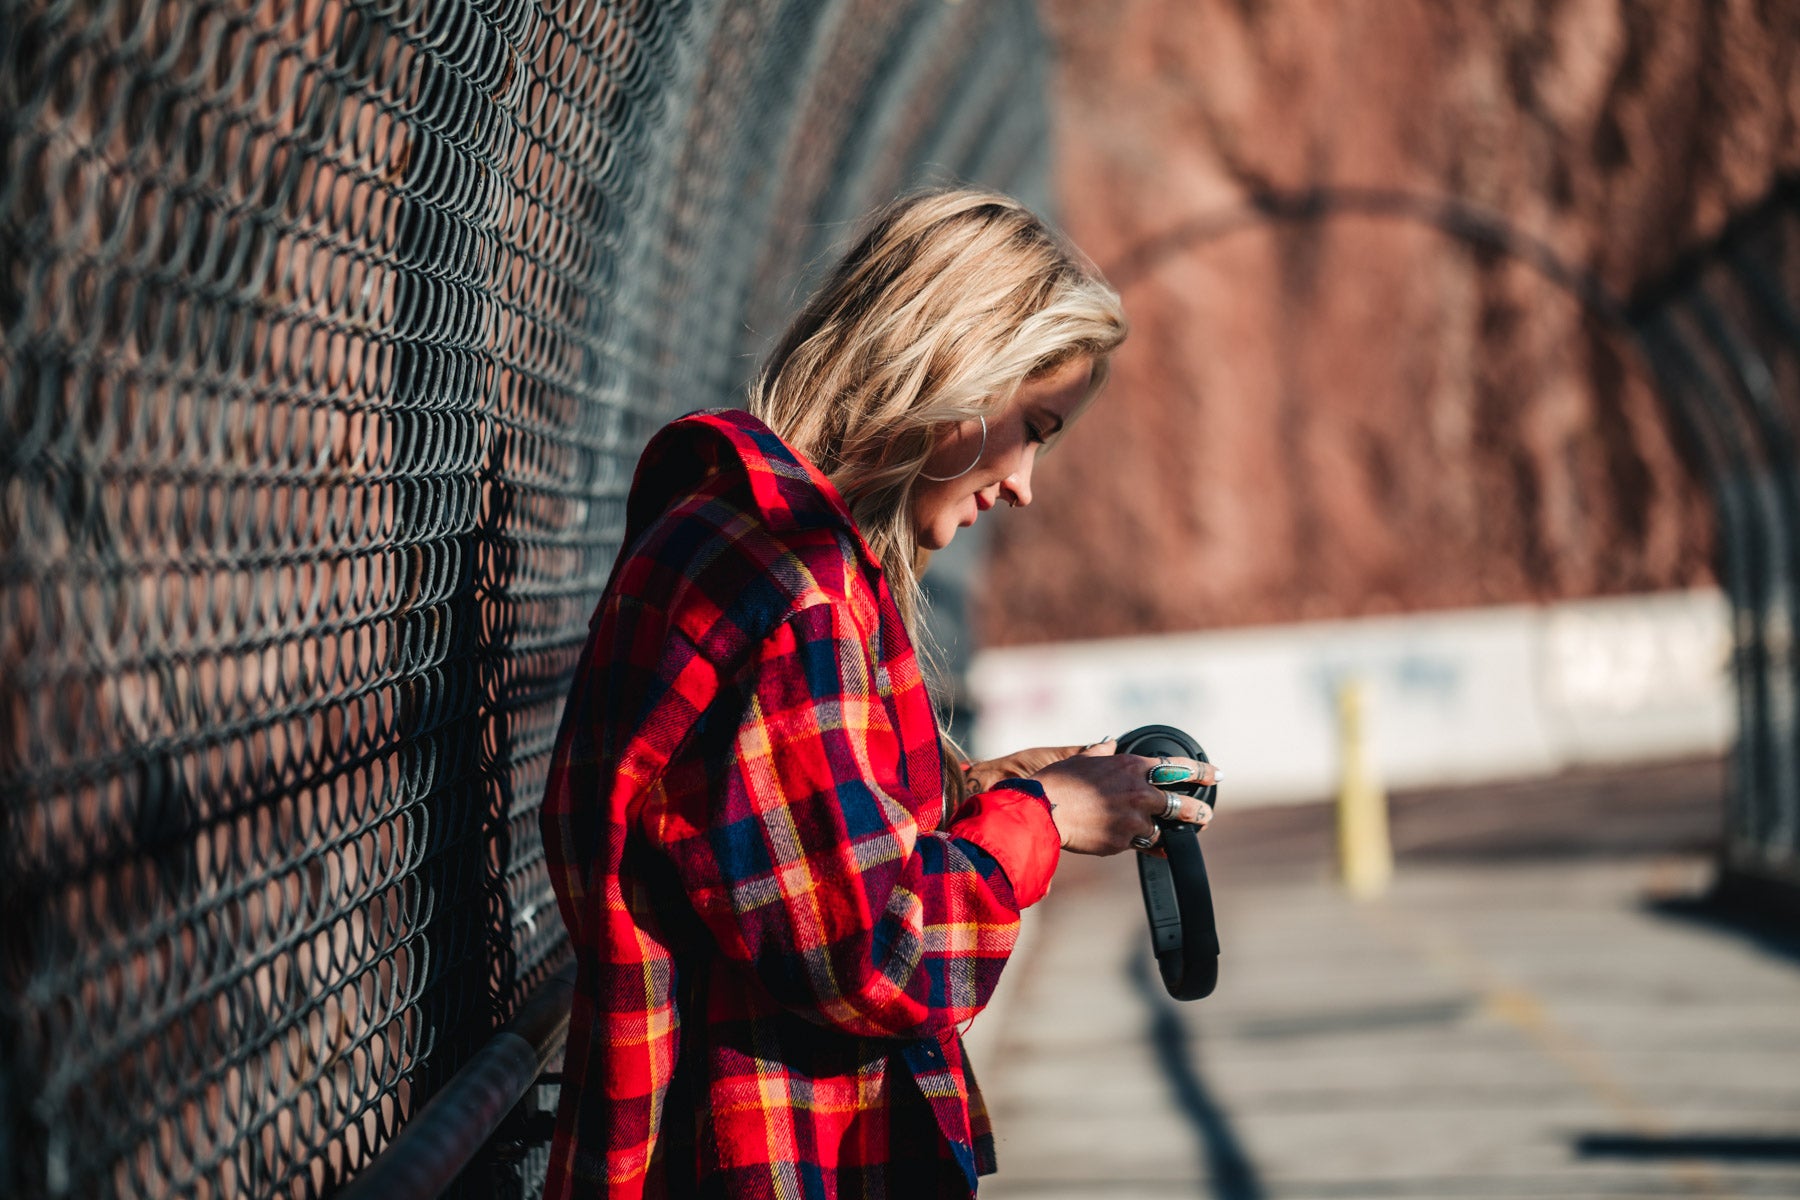 Endo Headphone held by woman in red flannel